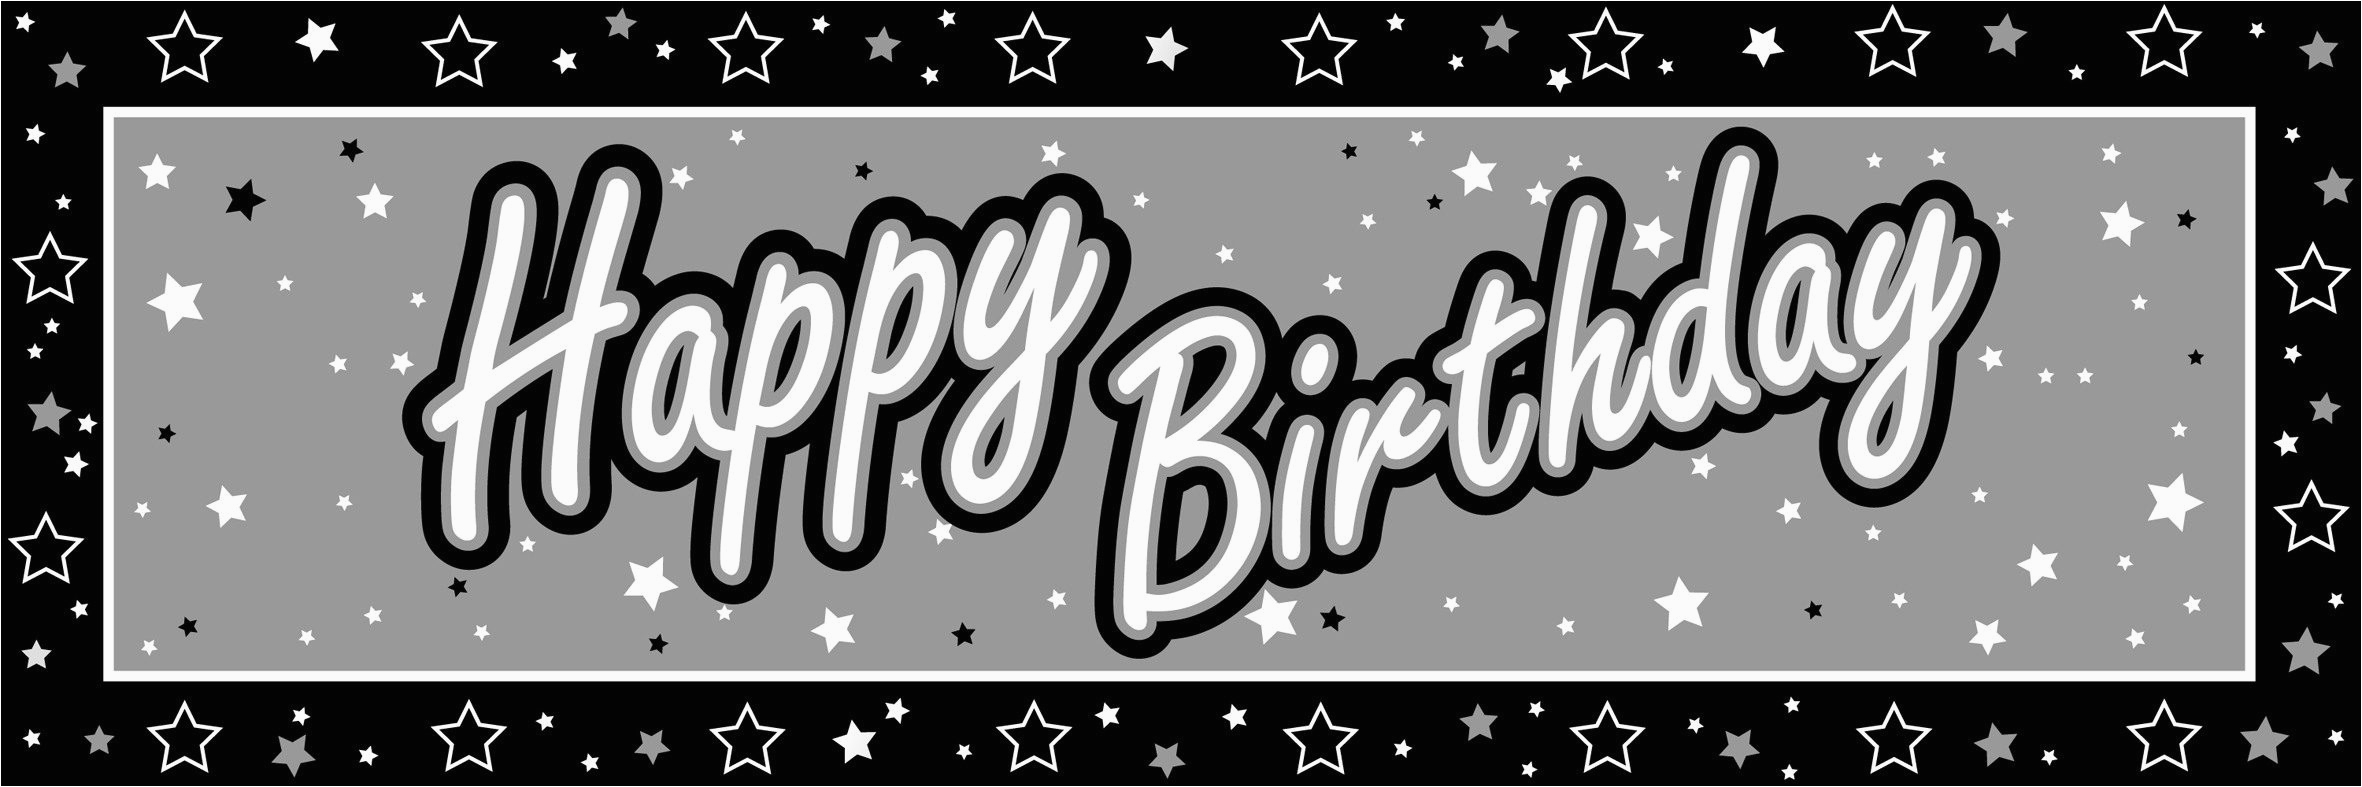 happy birthday banner clipart black and white